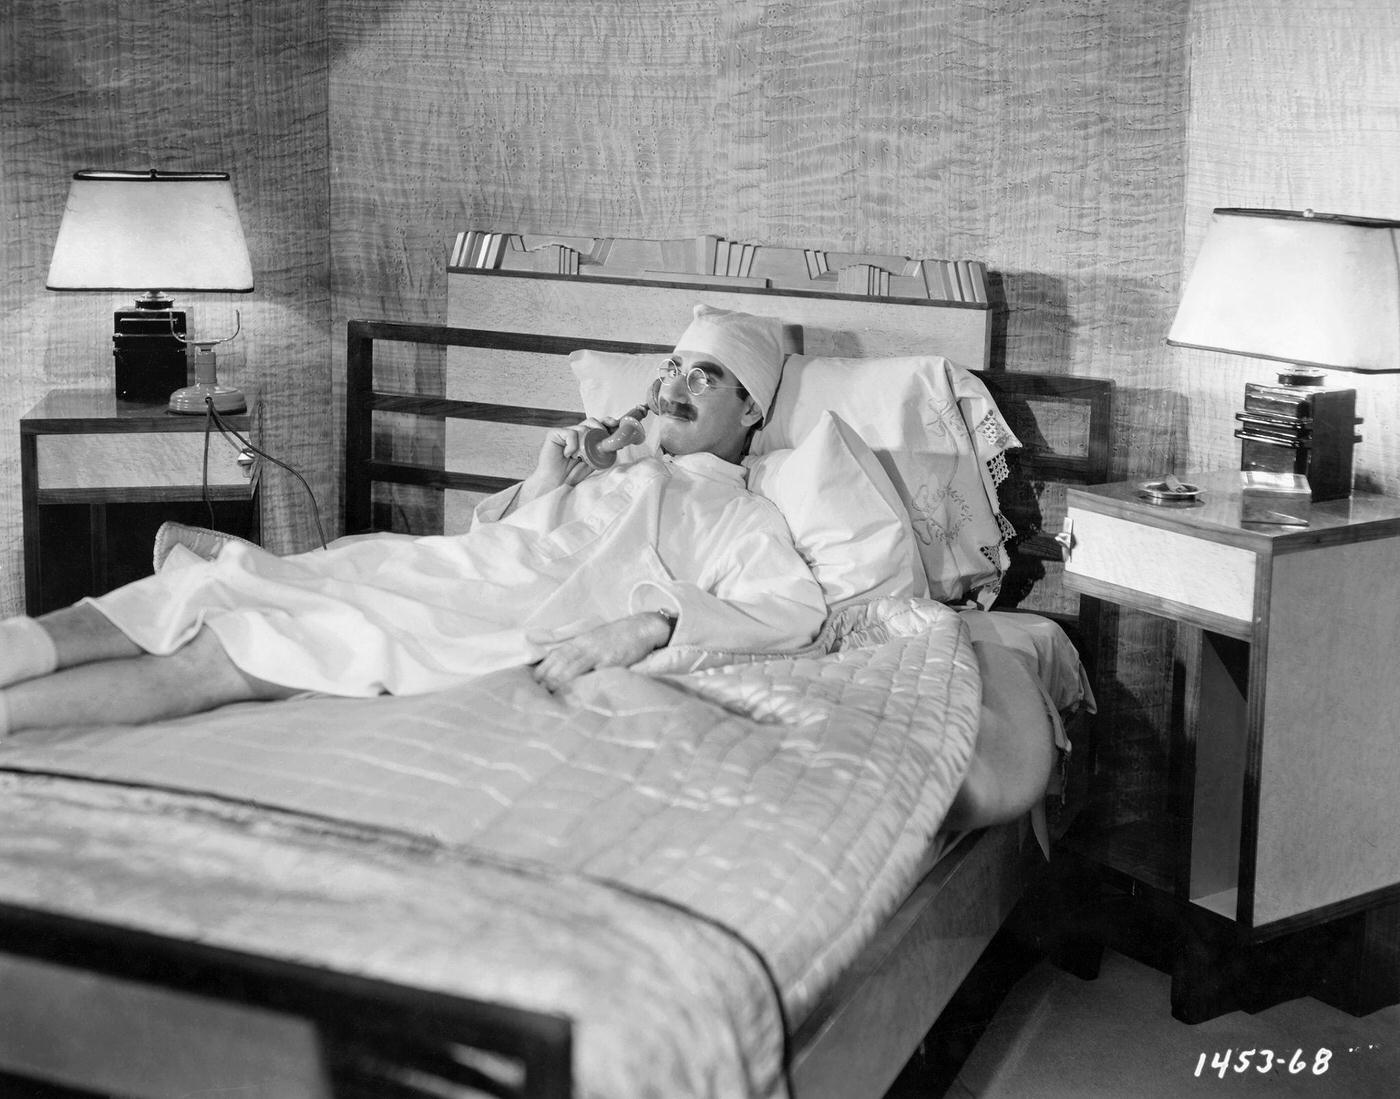 Groucho Marx lounging on a bed, talking on the phone for the film Duck Soup (1933).